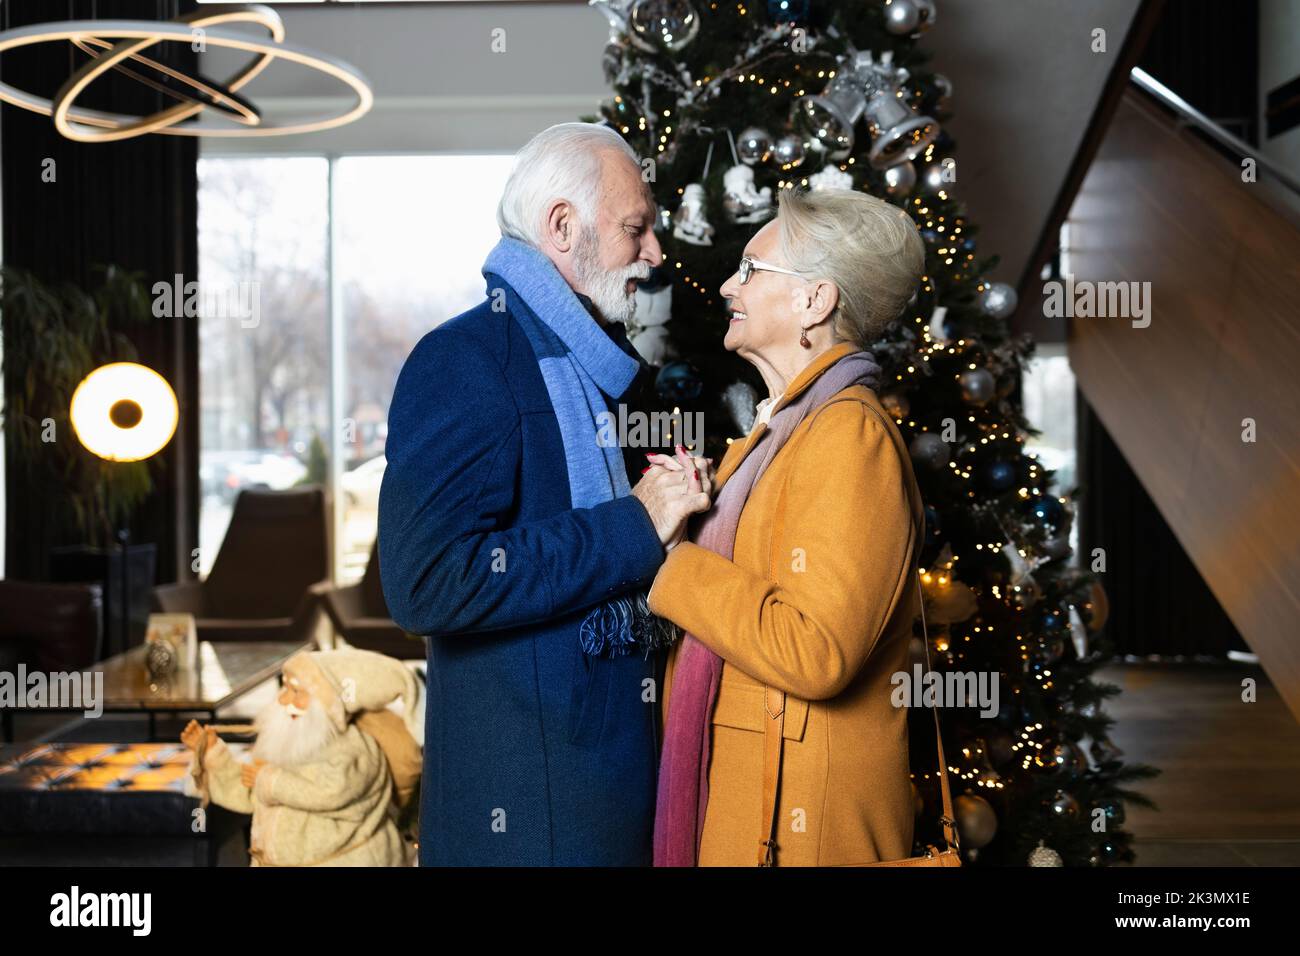 Two elderly people holding hands by the Christmas tree Stock Photo